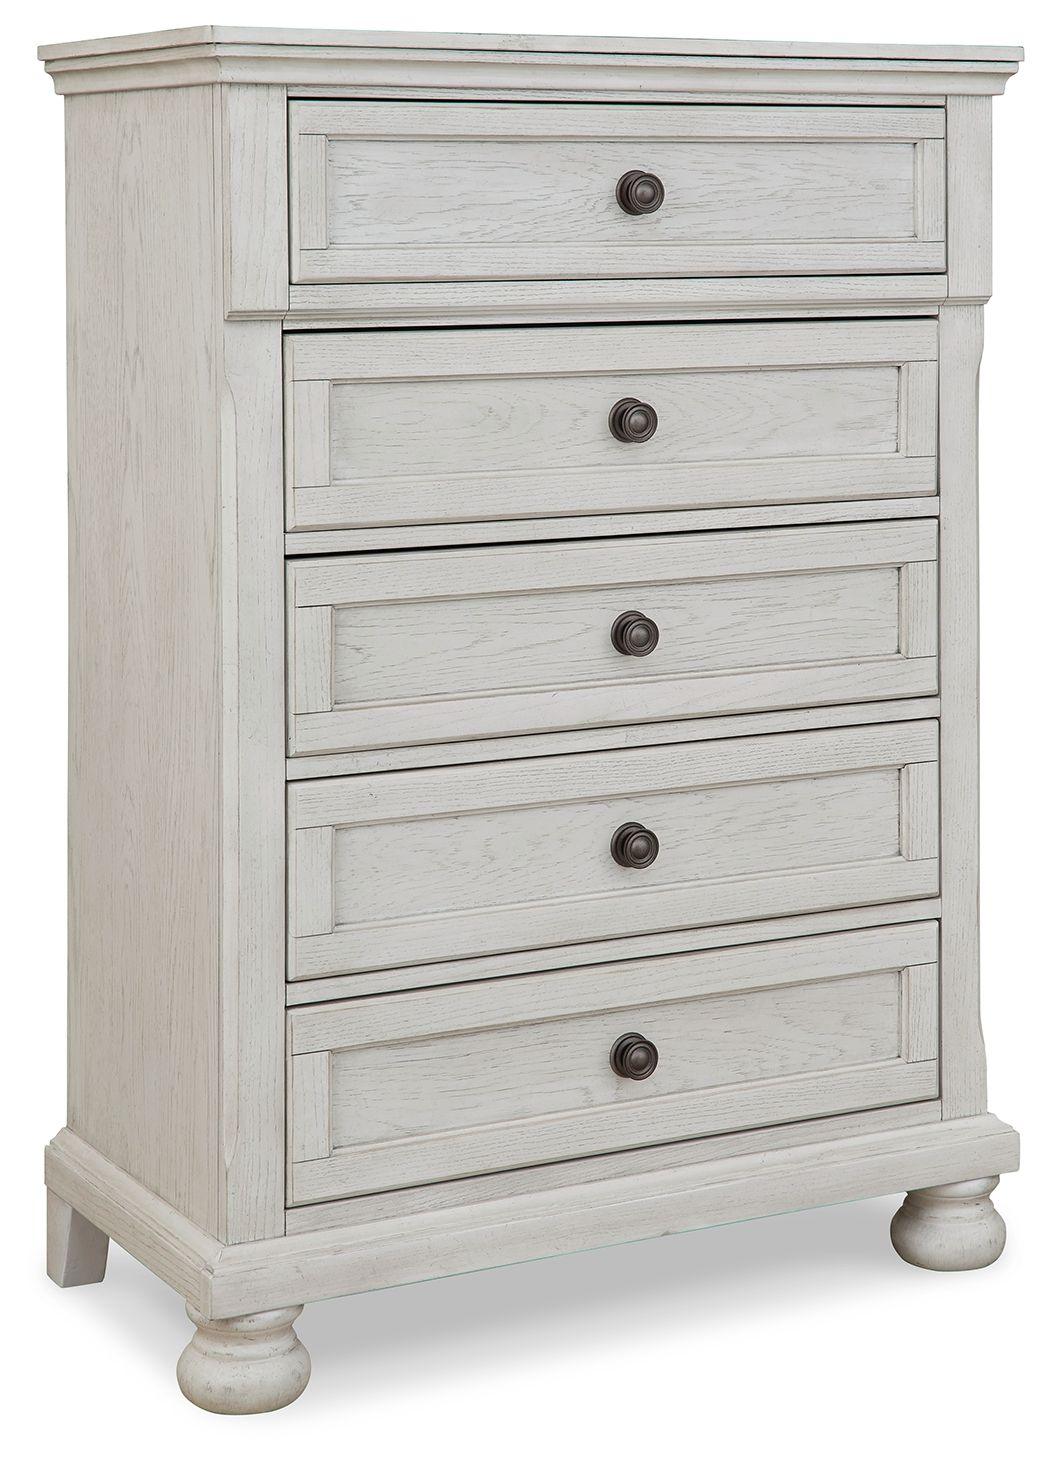 Robbinsdale - Antique White - Five Drawer Chest - Youth Tony's Home Furnishings Furniture. Beds. Dressers. Sofas.